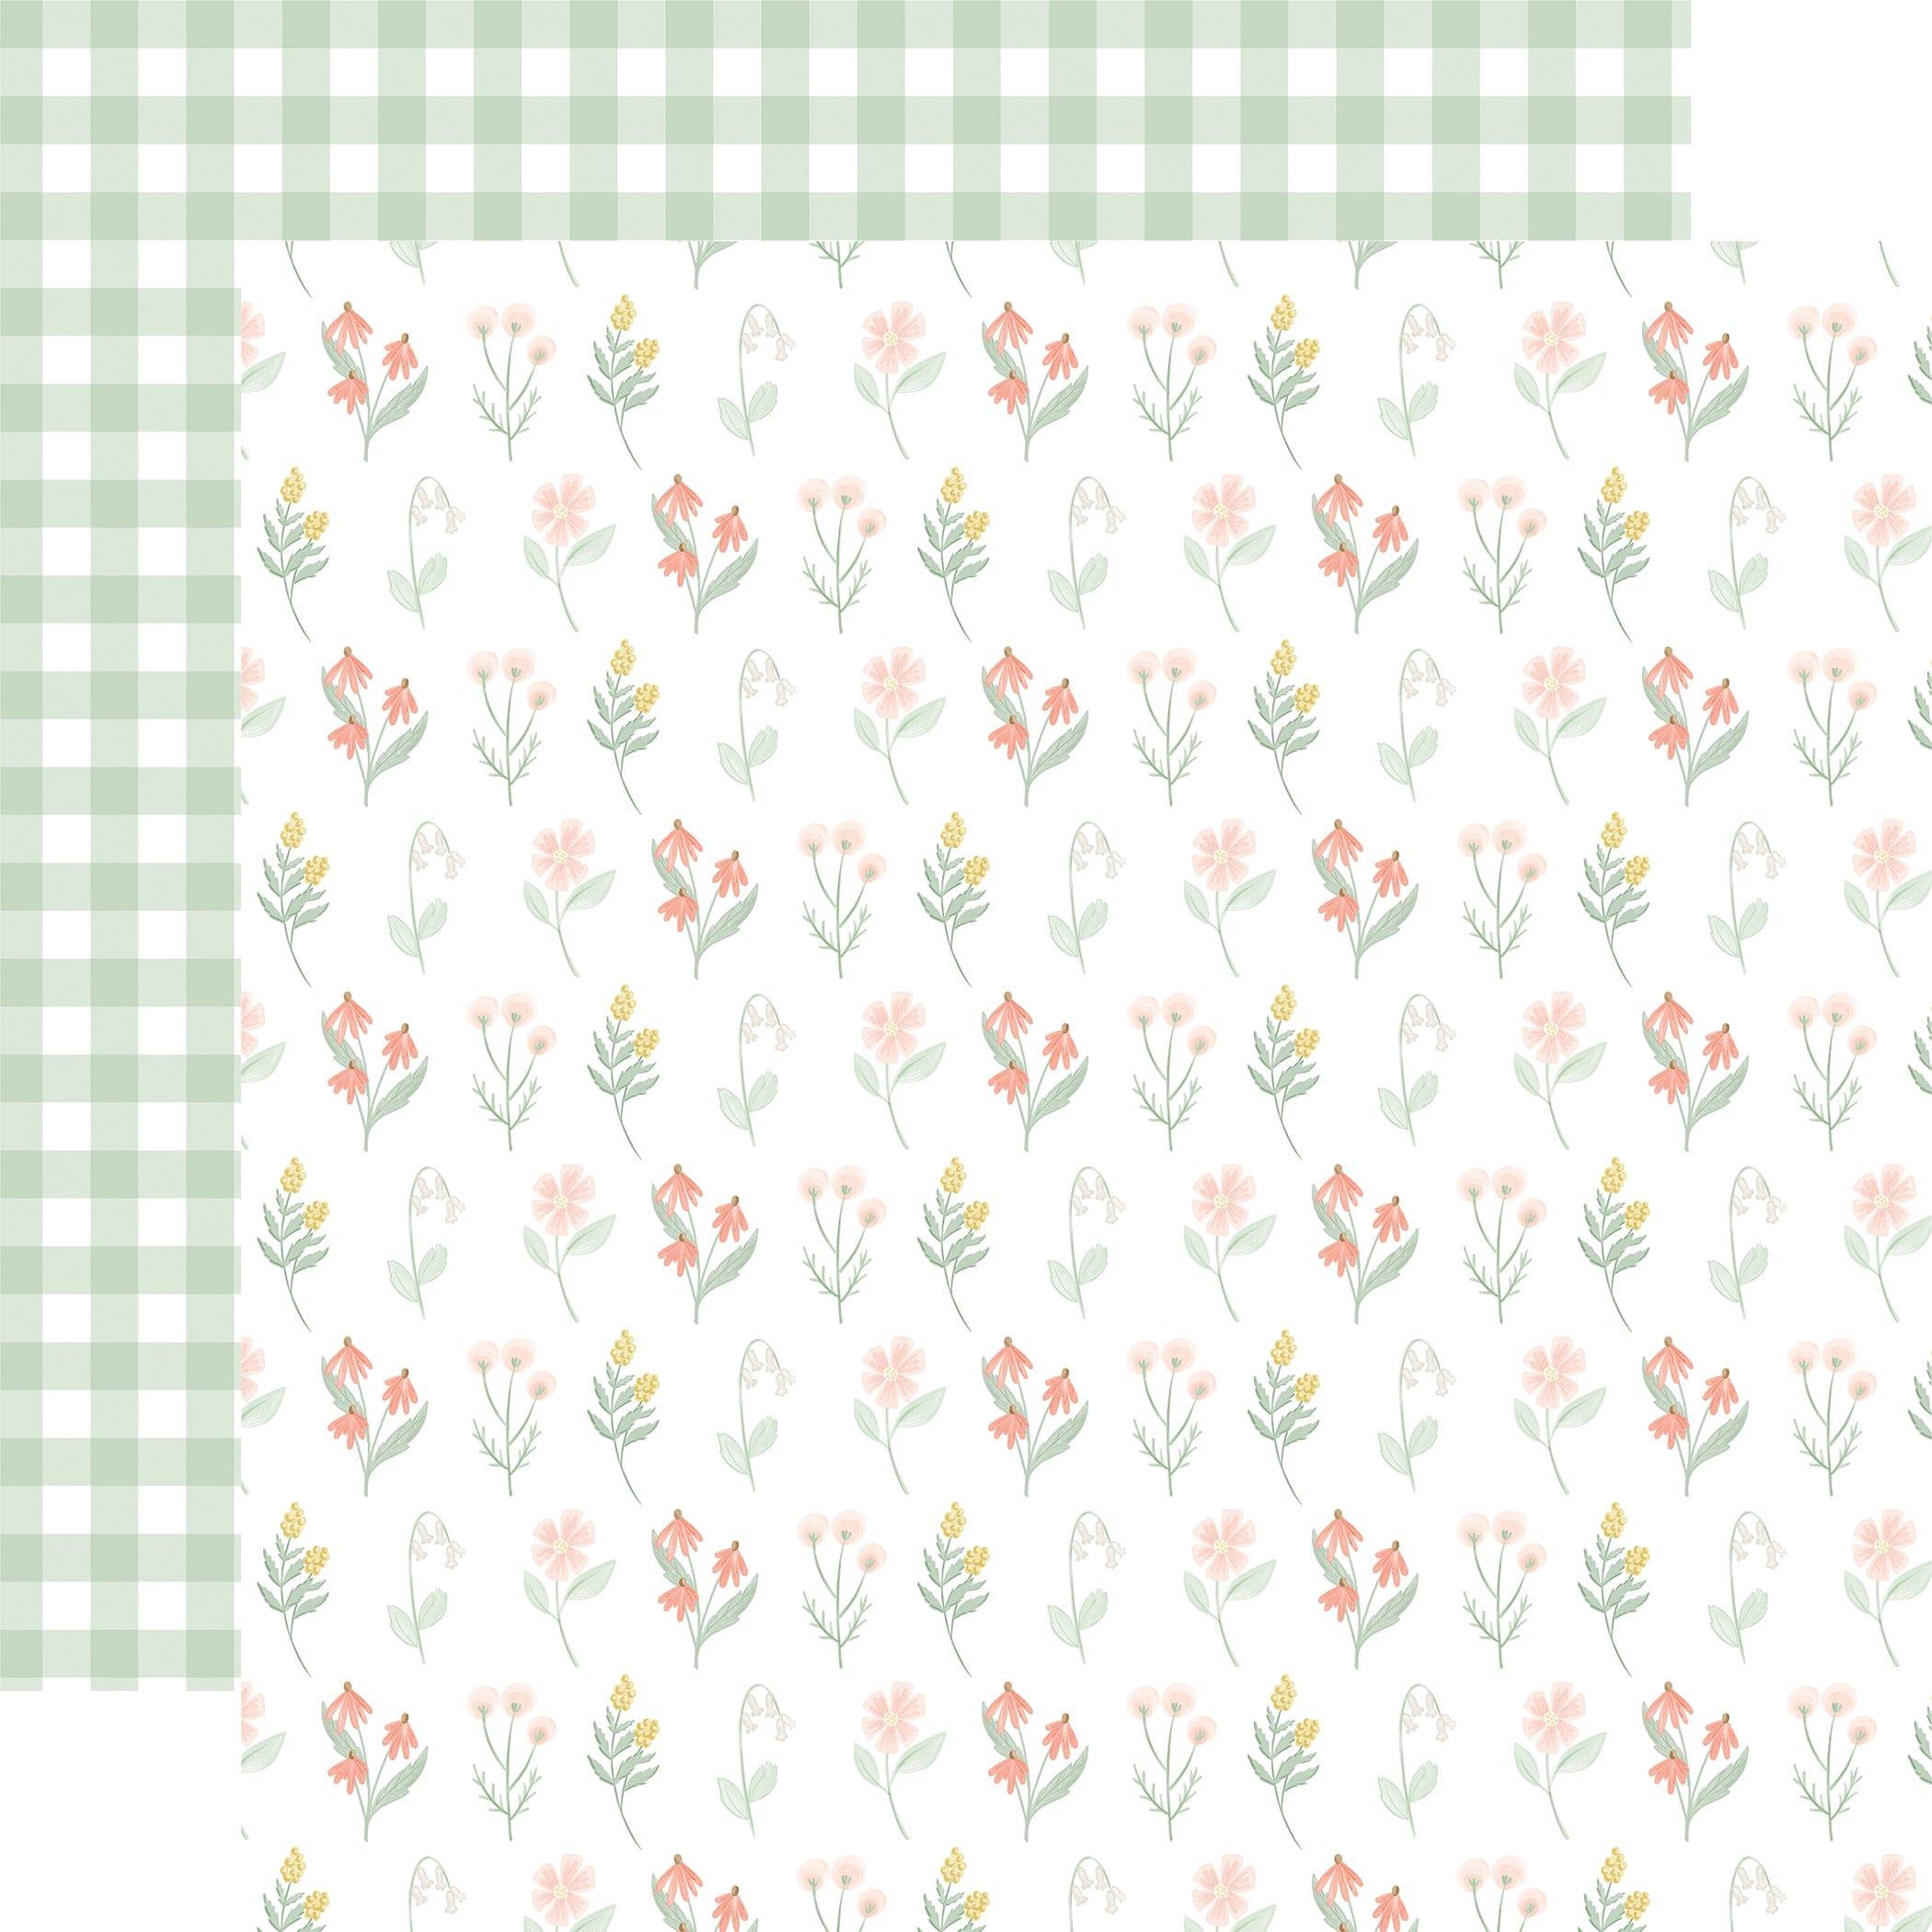 It's A Girl Collection Flower Meadow 12 x 12 Double-Sided Scrapbook Paper by Echo Park Paper - Scrapbook Supply Companies